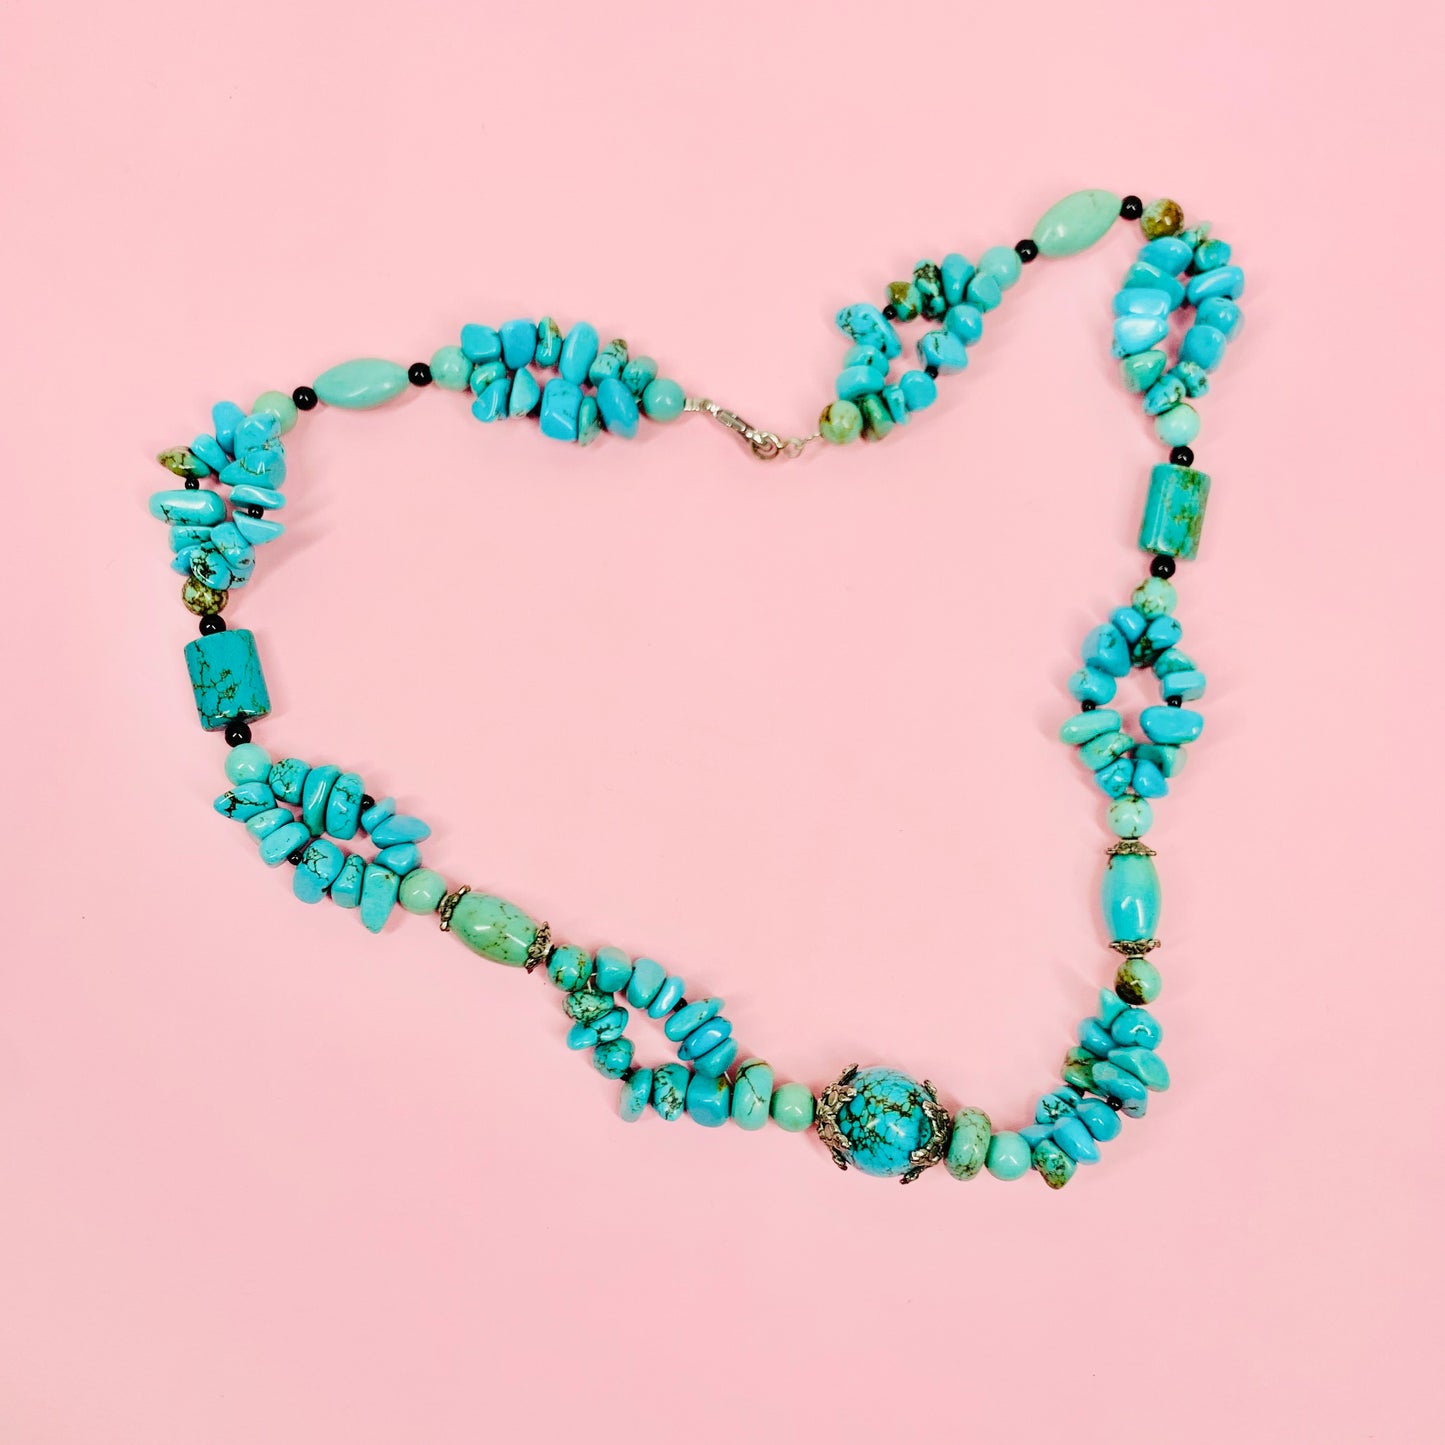 Antique natural turquoise beads necklace